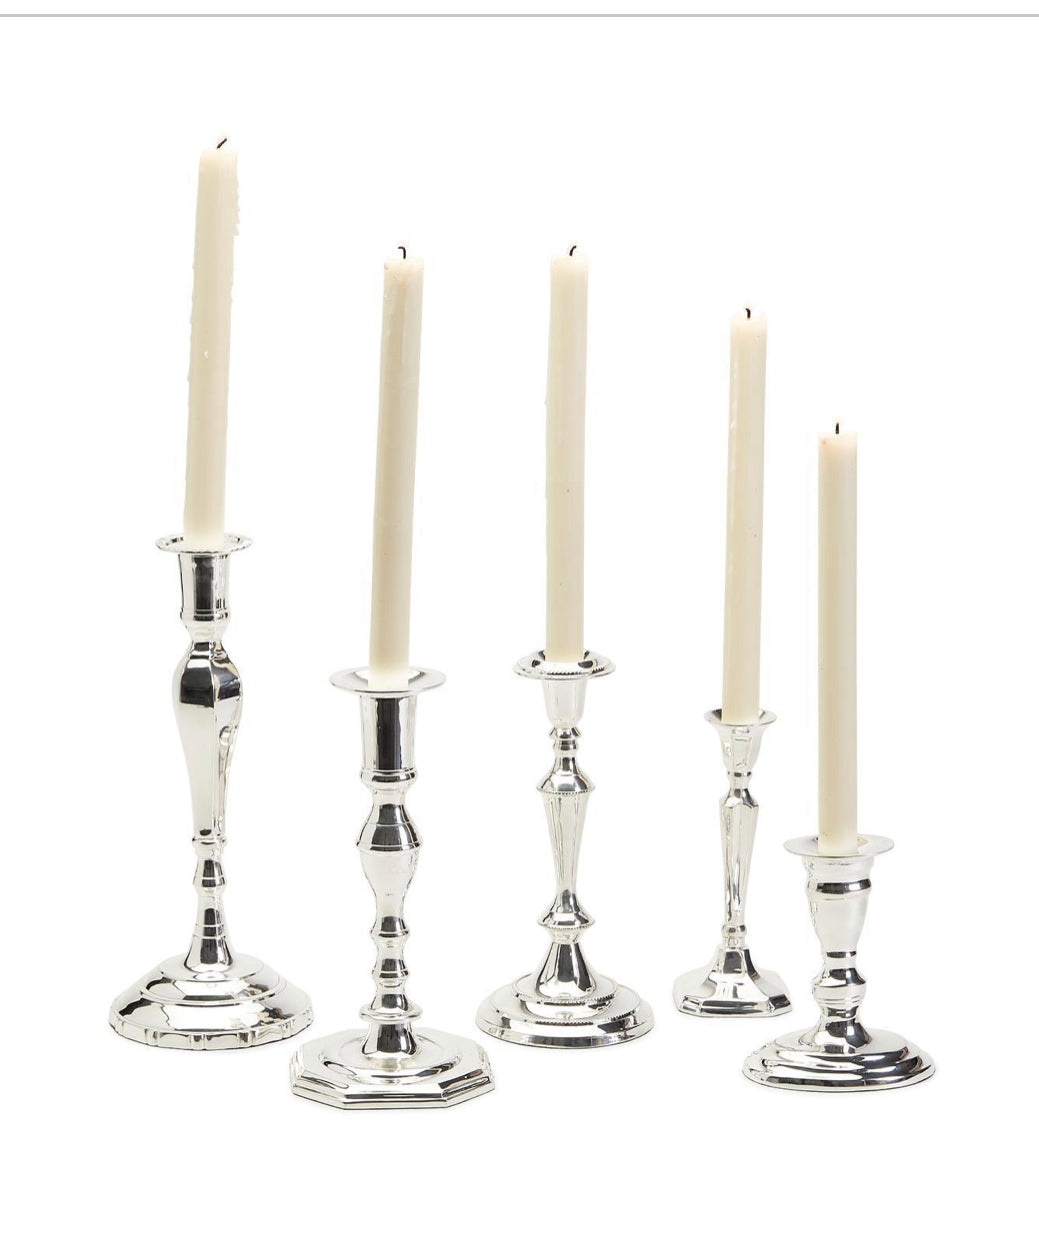 Candlesticks, Silver Plated (Set of 5)